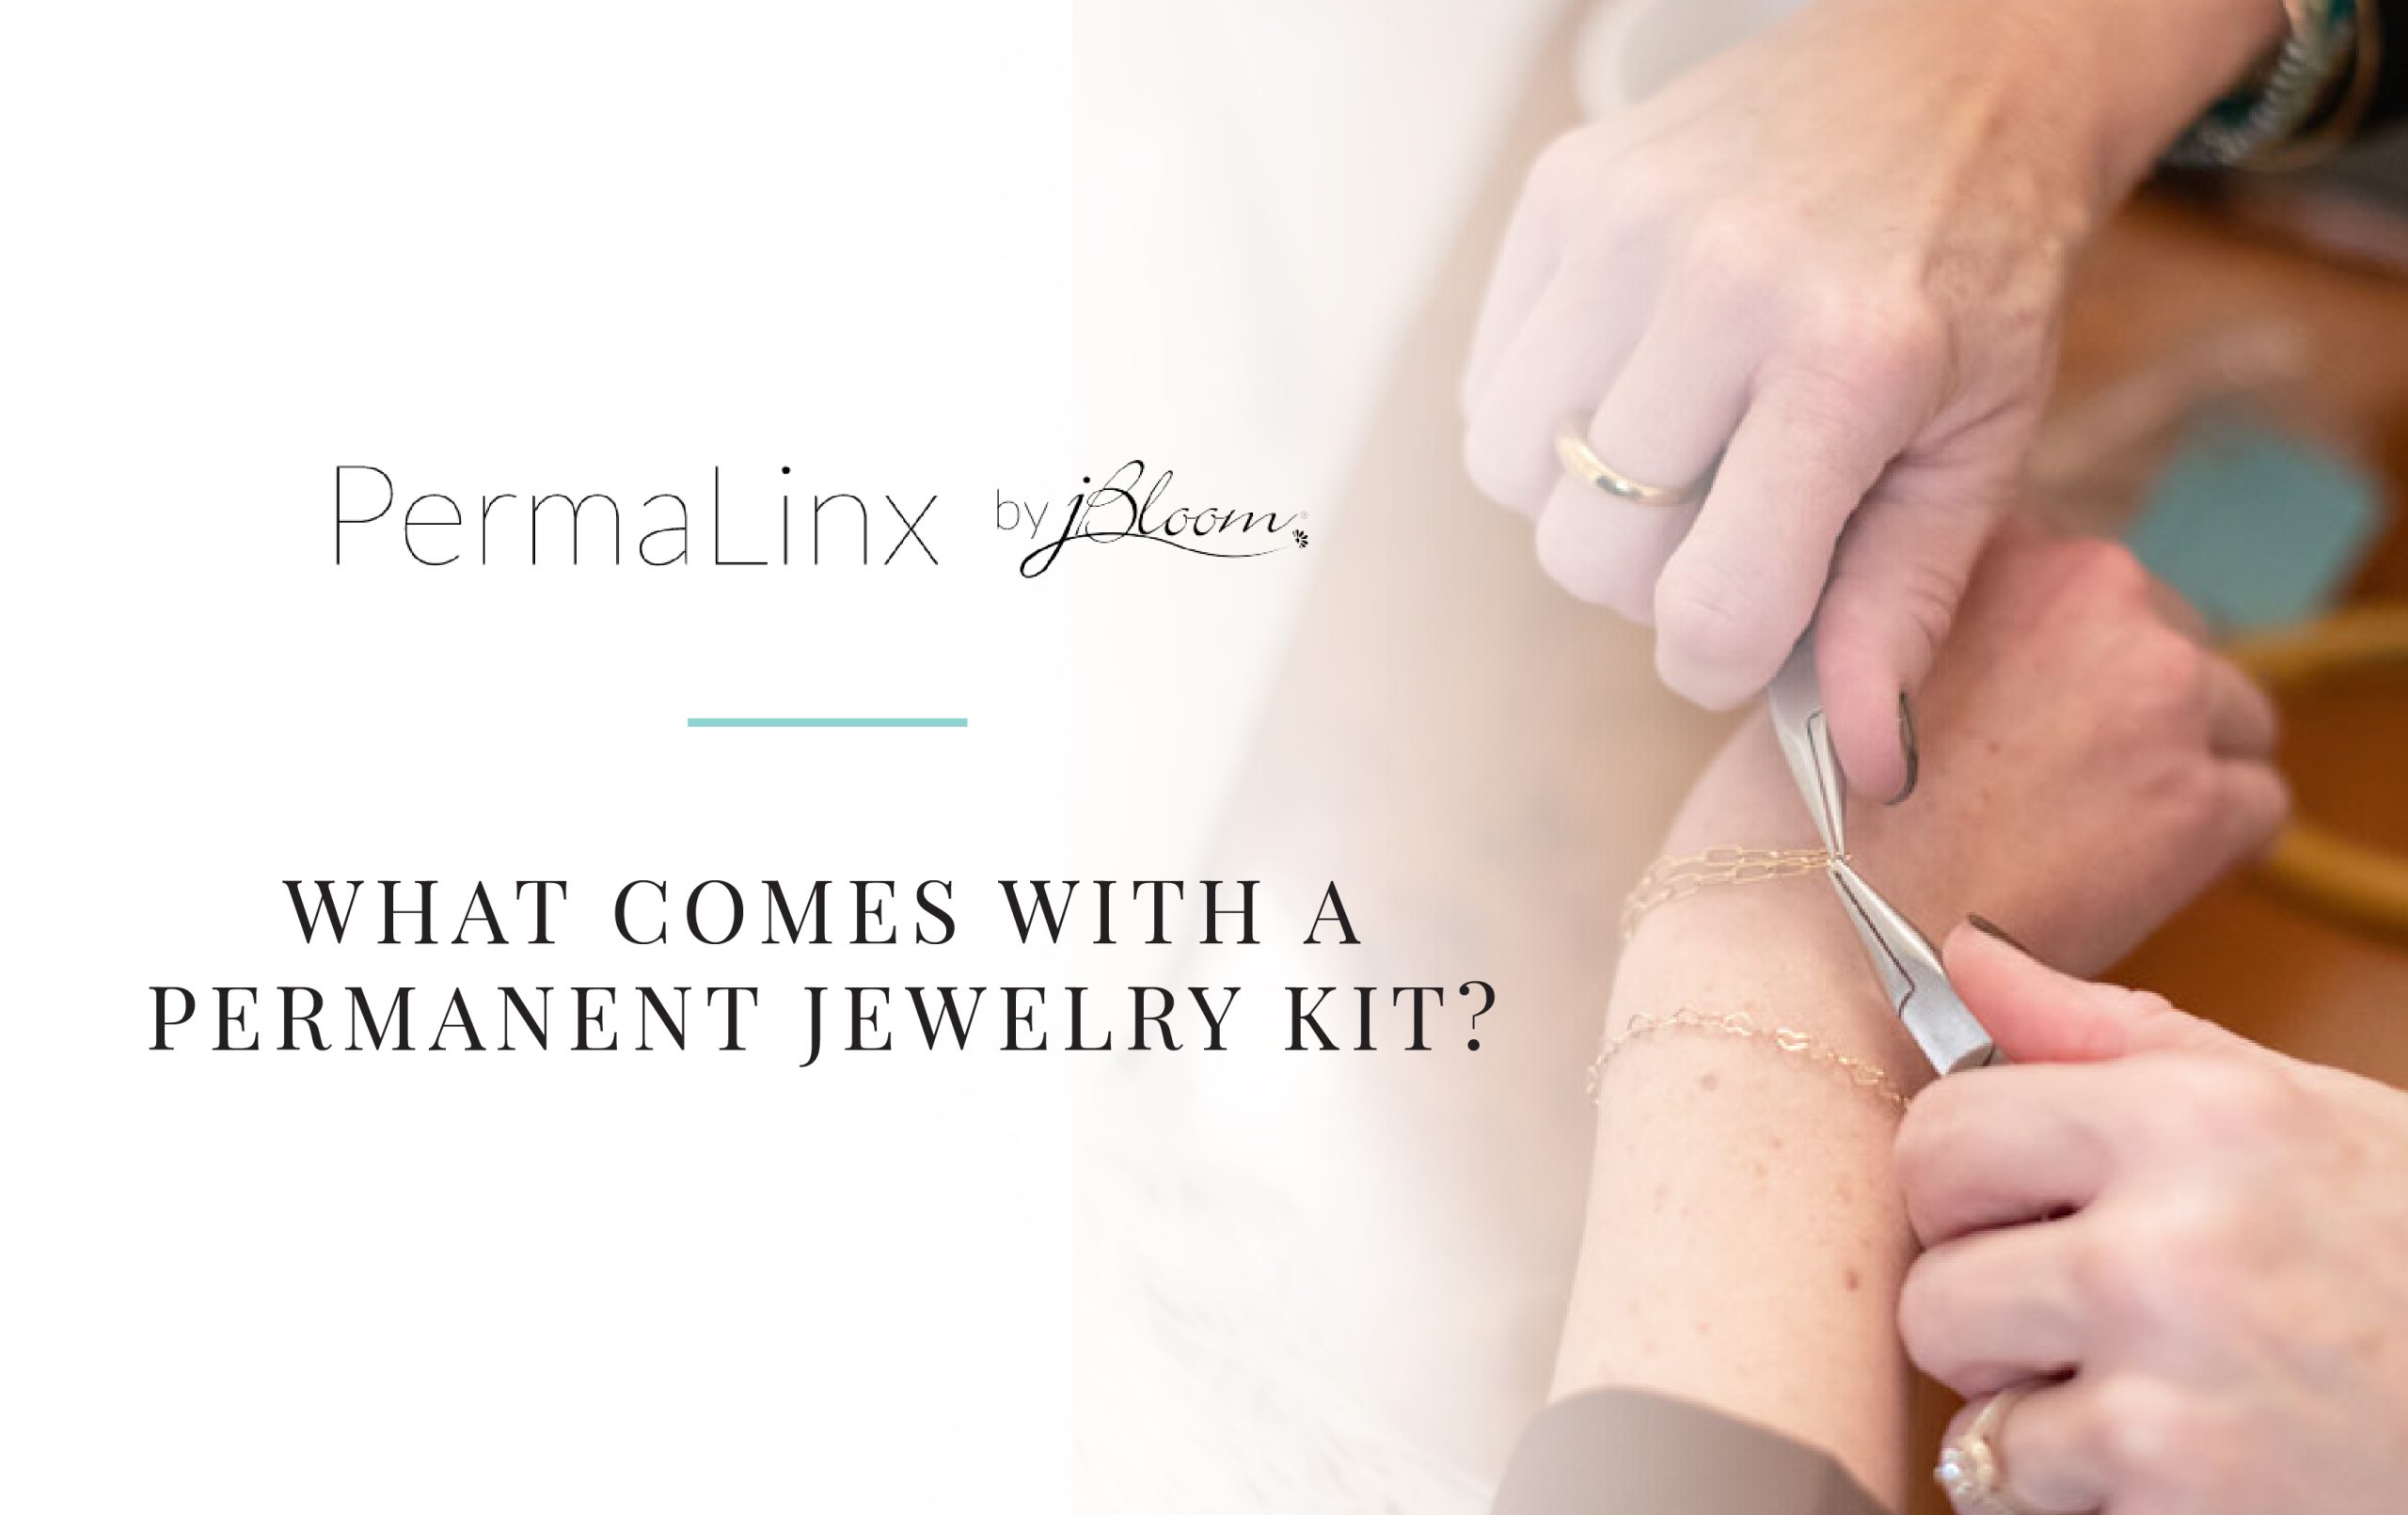 What's in a Permanent Jewelry Business Kit?